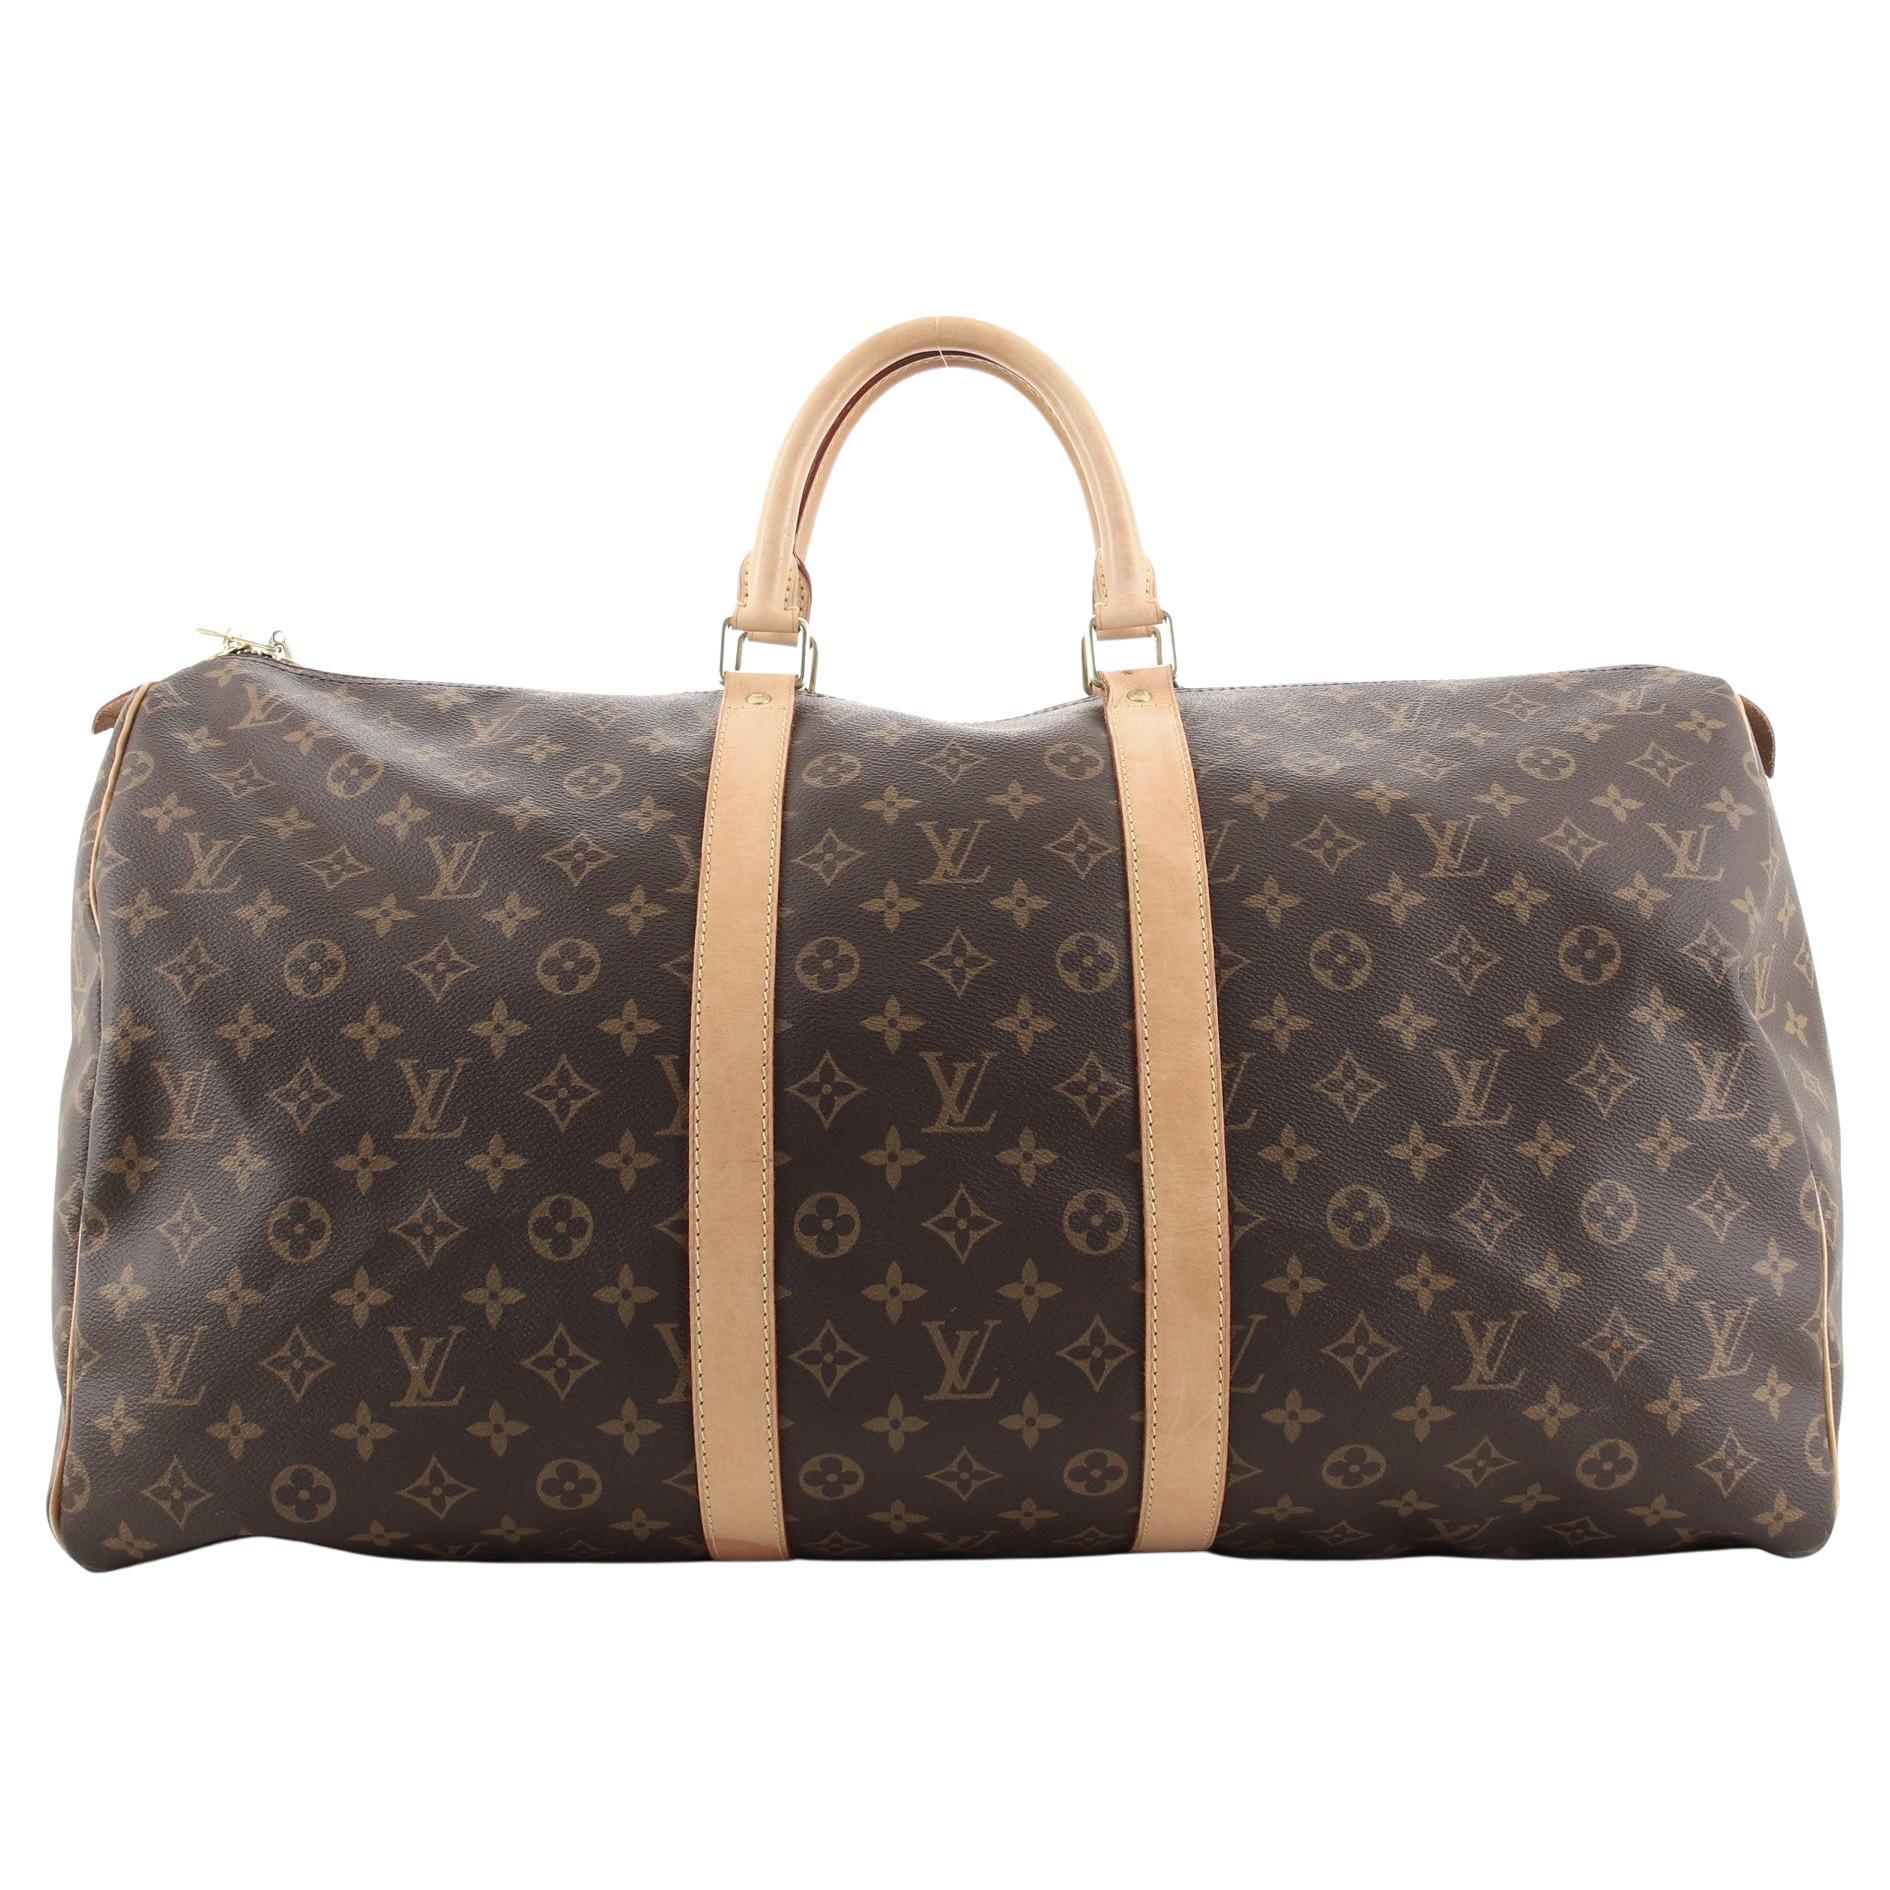 Louis Vuitton Bags 55 - 148 For Sale on 1stDibs